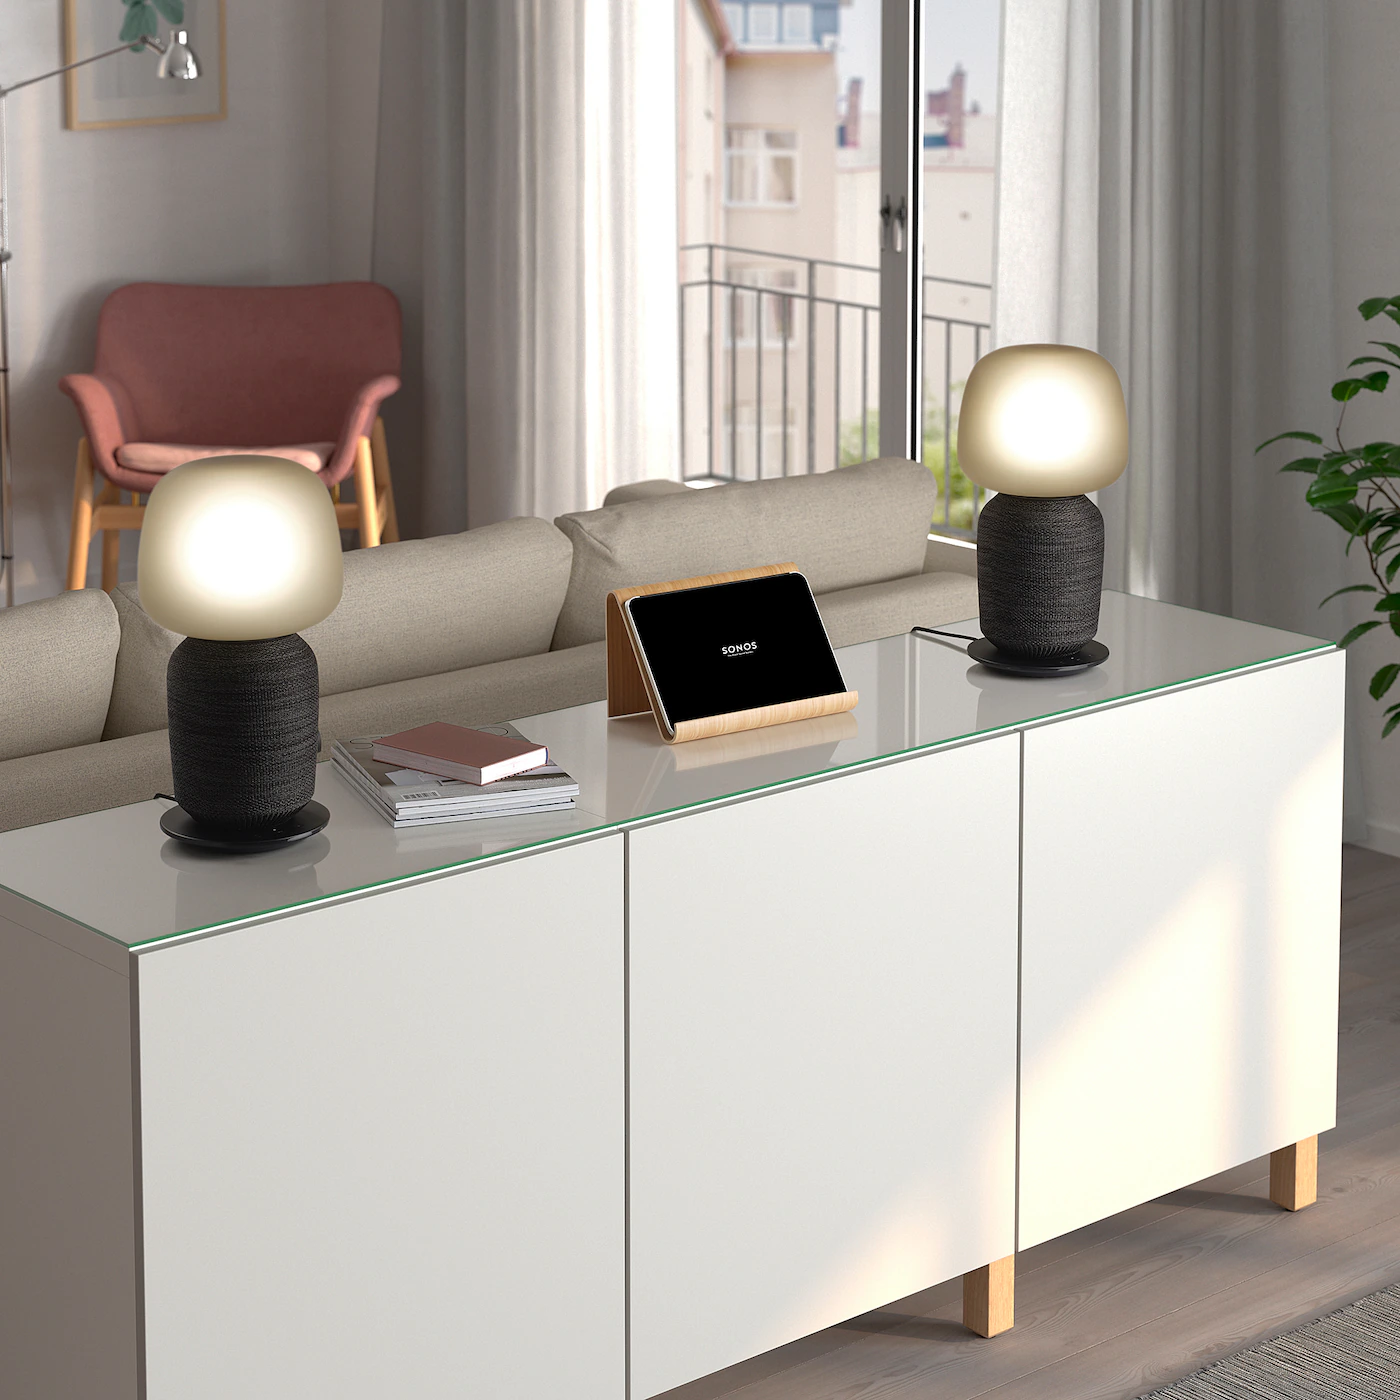 IKEA similarly designed this SYMFONISK table lamp in collaboration with Sonos to help their speaker's blend better into modern decor schemes.